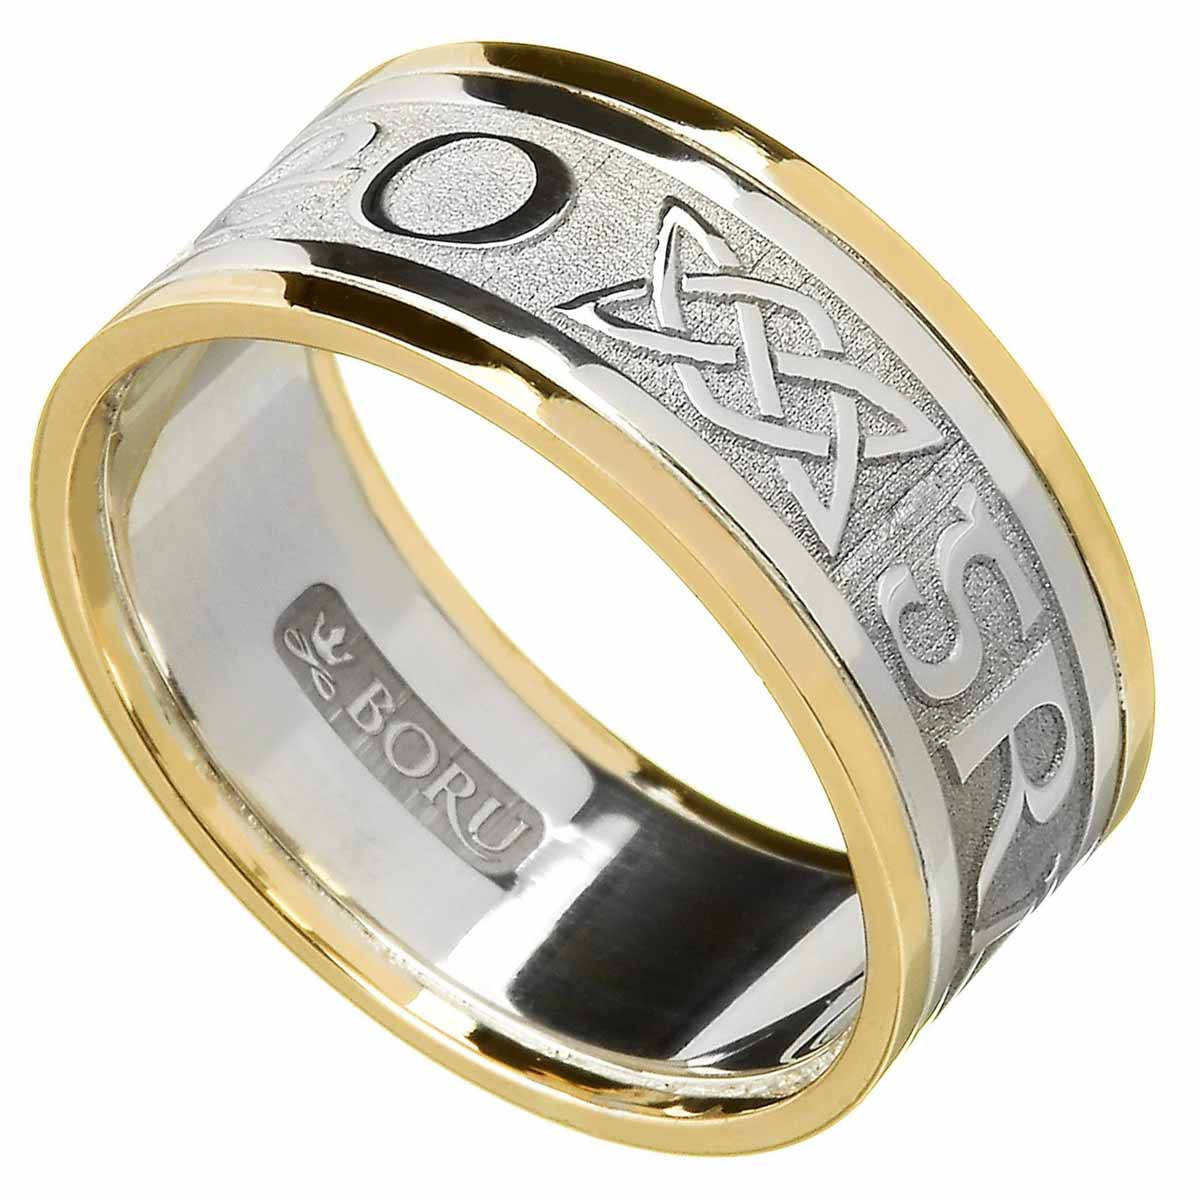 Product image for Irish Ring - Men's White Gold with Yellow Gold Trim - Gra Go Deo 'Love Forever' Irish Wedding Ring